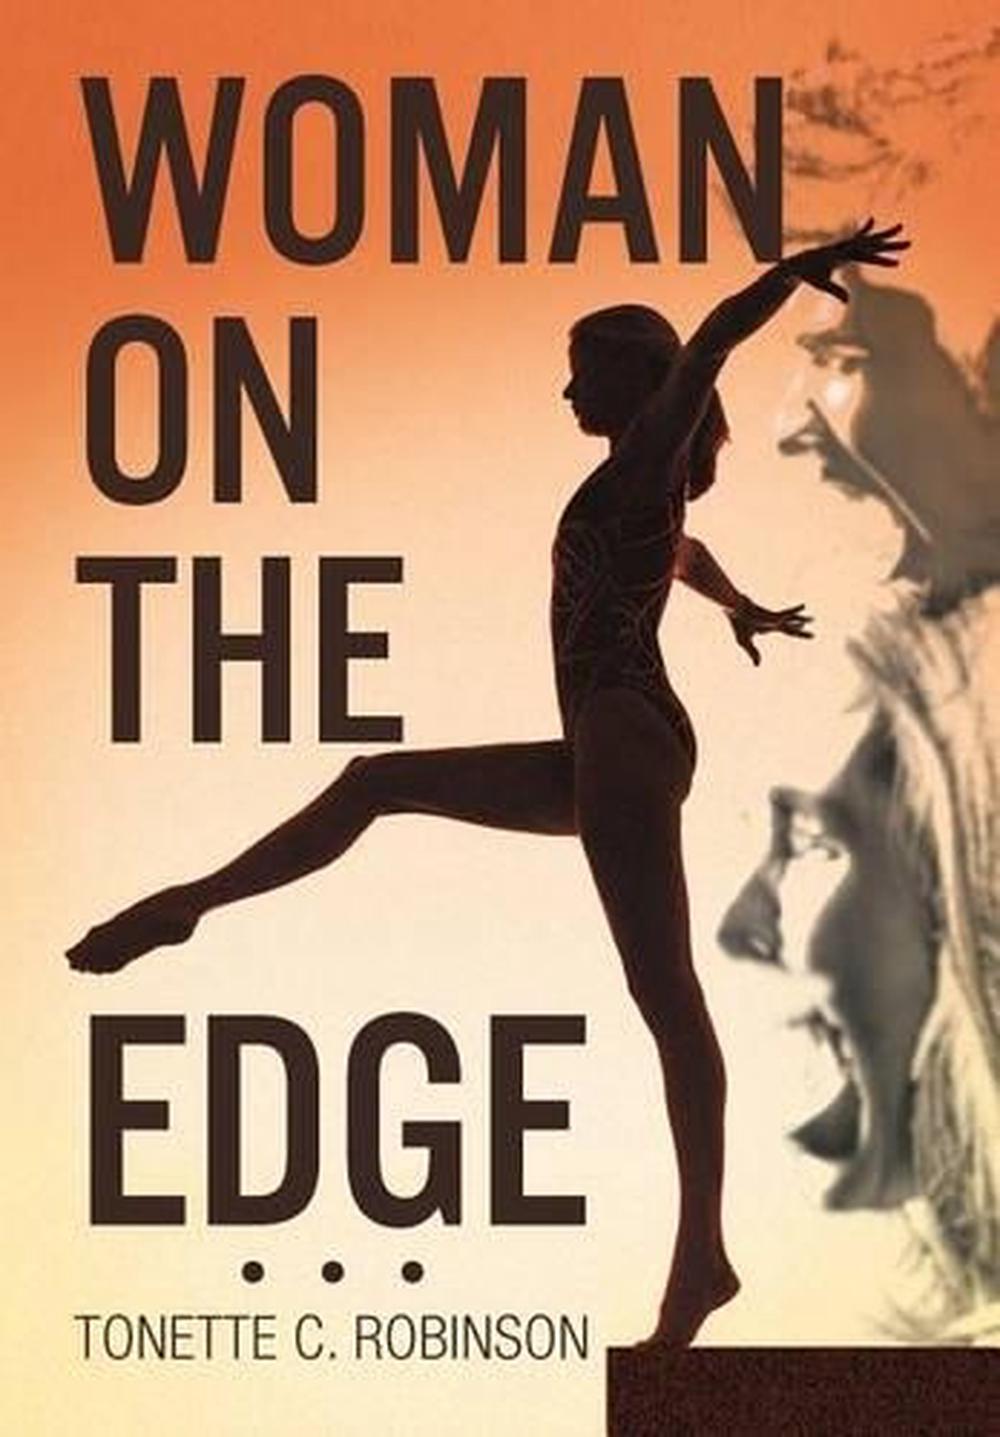 woman on the edge of time by marge piercy